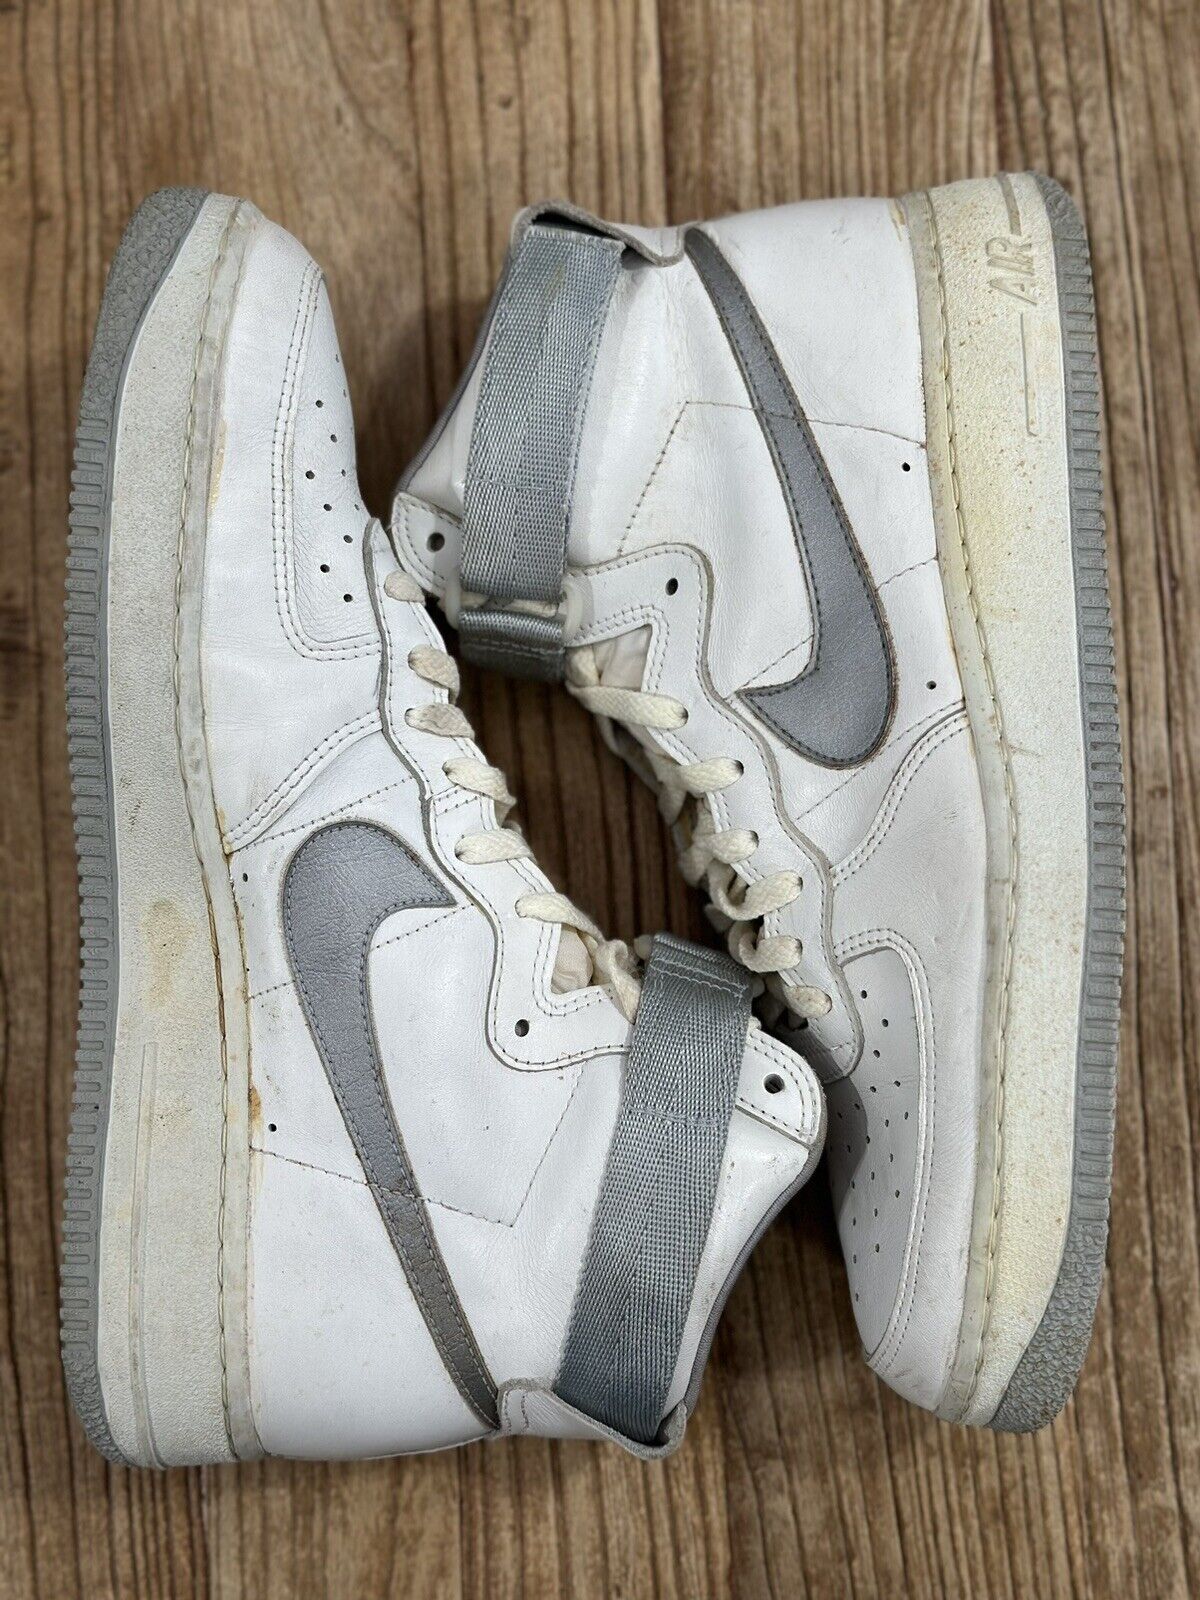 1982 Air Force 1s, available on eBay